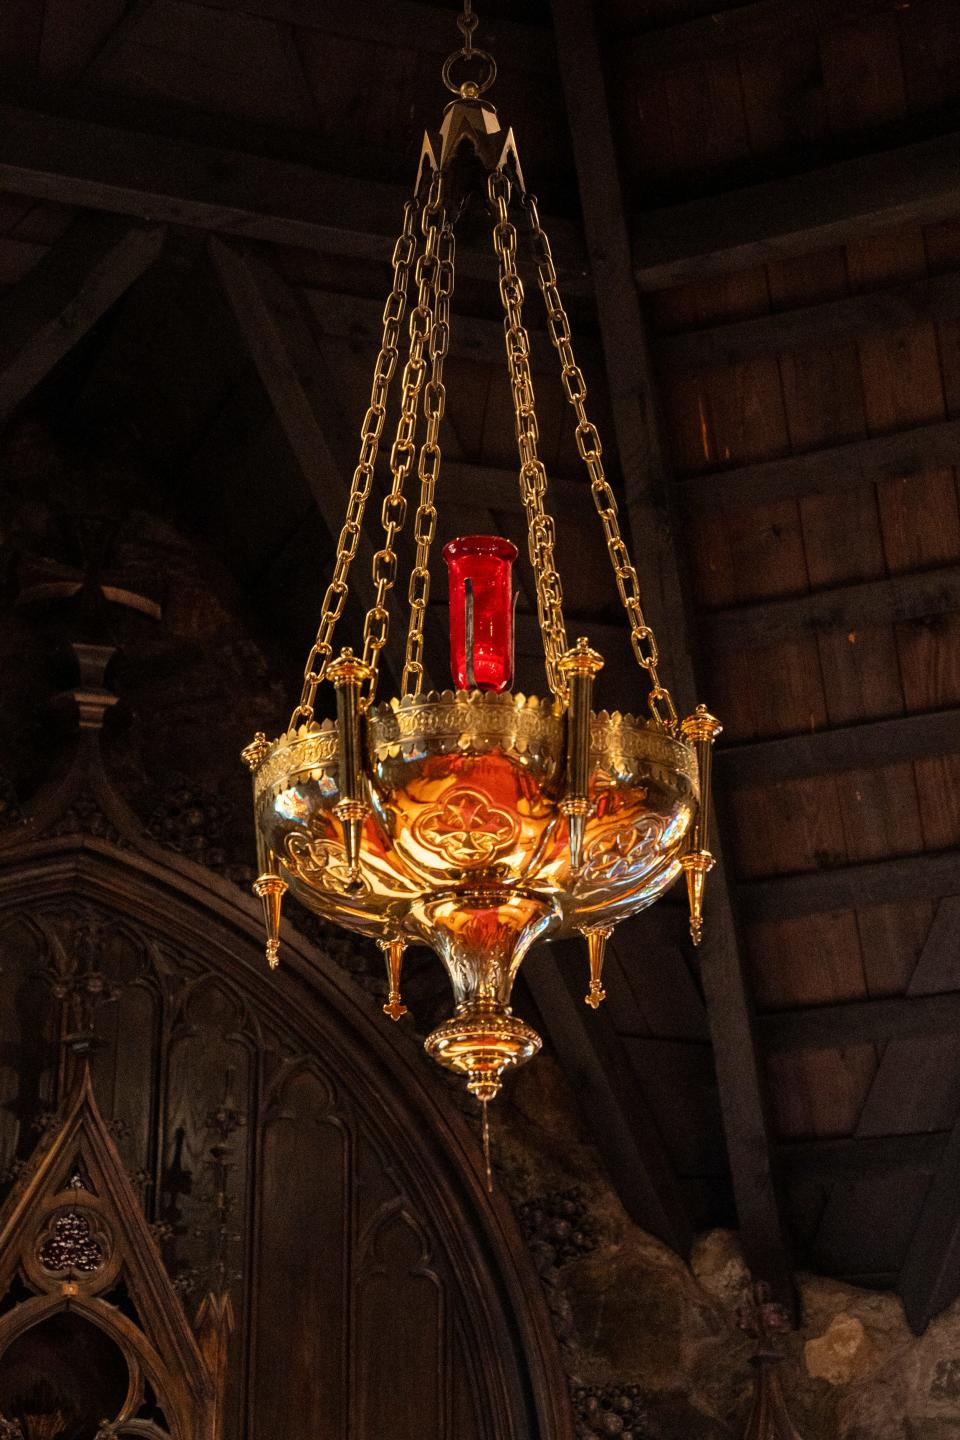 The Sanctus light, donated by the DeMille family, hangs in Christ Episcopal Church, where Cecil B. DeMille was inspired to create Biblical films like "The Ten Commandments."